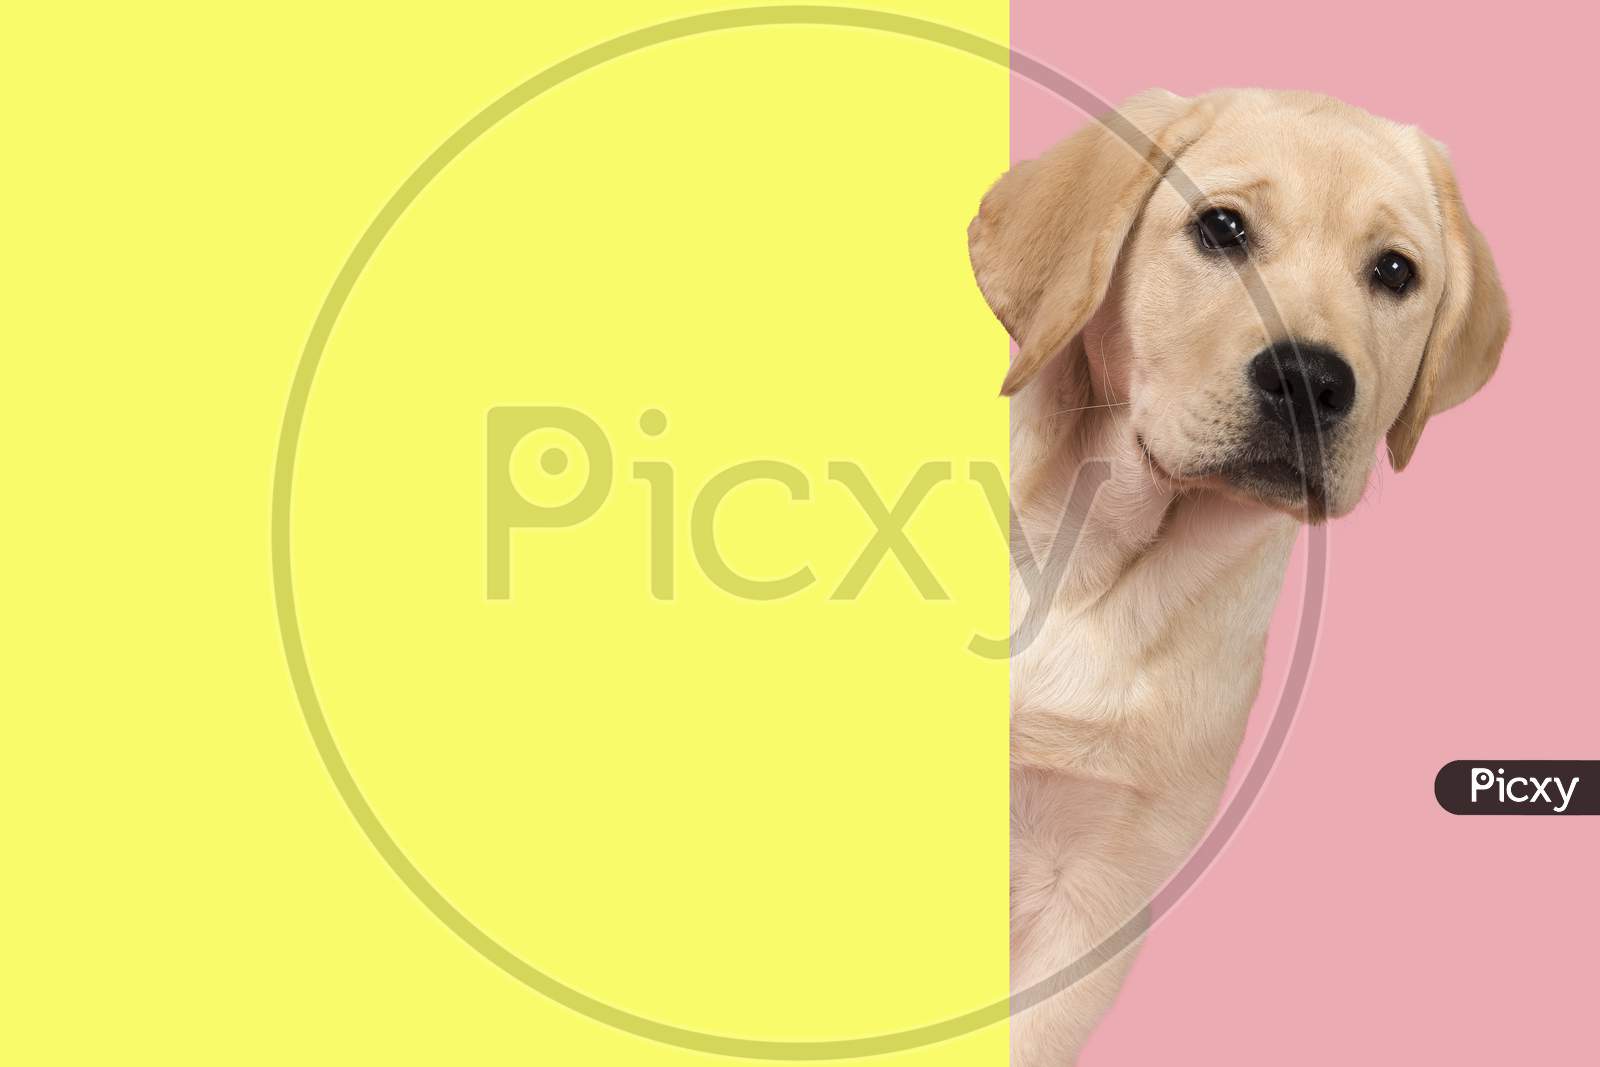 Portrait Of A Cute Labrador Retriever Puppy On A Pink Background In A Vertical Image